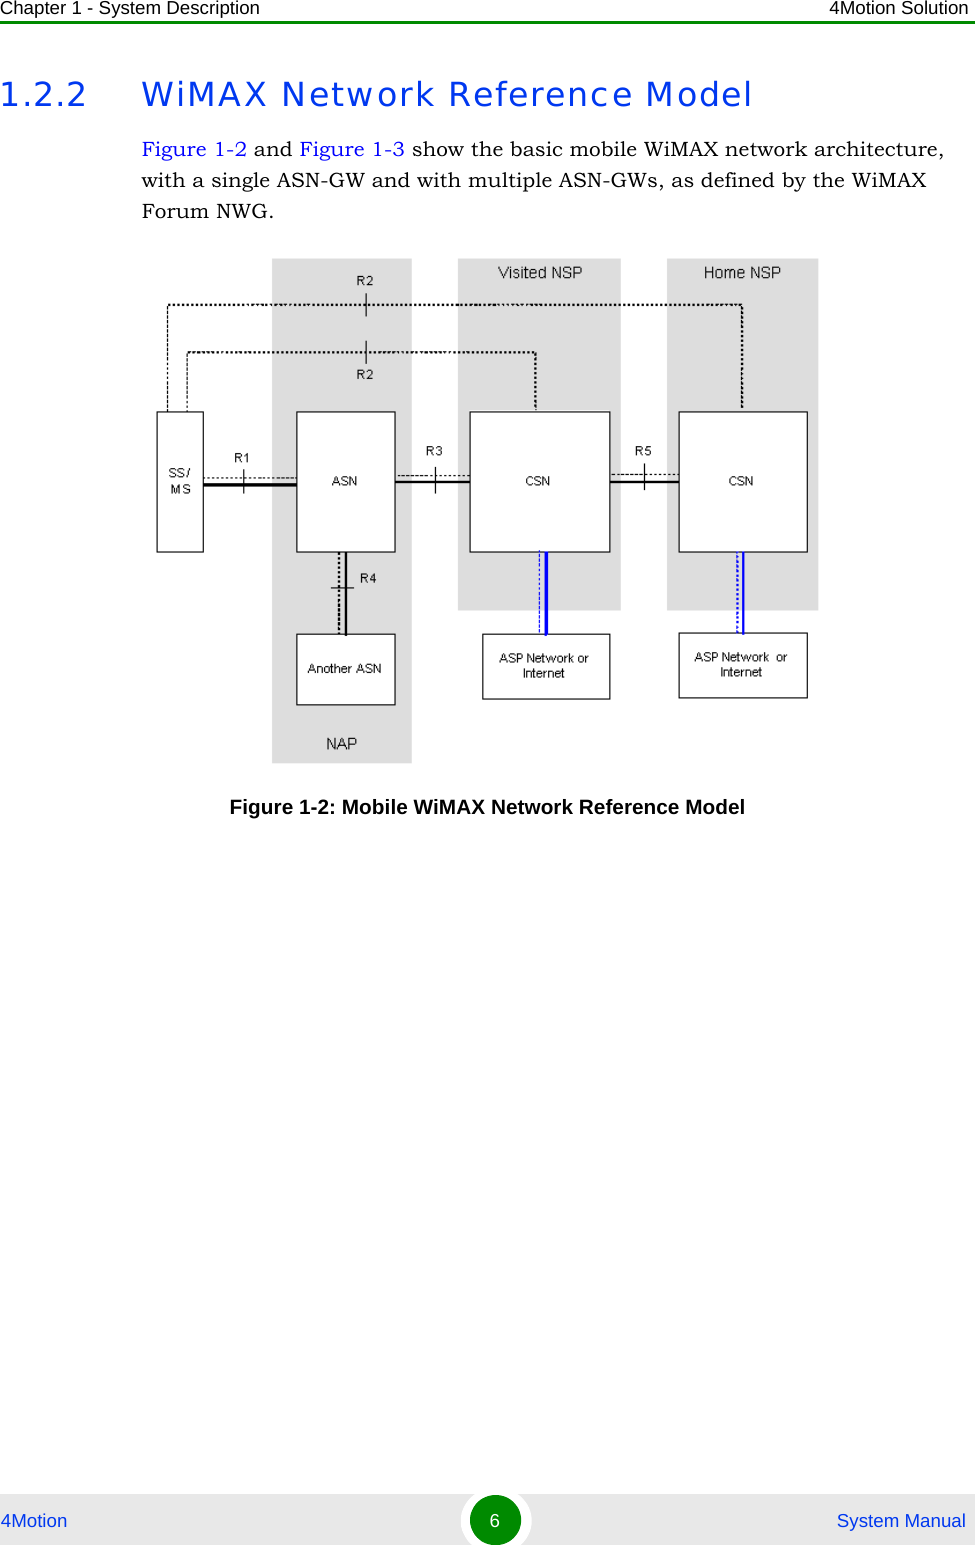 Chapter 1 - System Description 4Motion Solution4Motion 6 System Manual1.2.2 WiMAX Network Reference ModelFigure 1-2 and Figure 1-3 show the basic mobile WiMAX network architecture, with a single ASN-GW and with multiple ASN-GWs, as defined by the WiMAX Forum NWG.Figure 1-2: Mobile WiMAX Network Reference Model